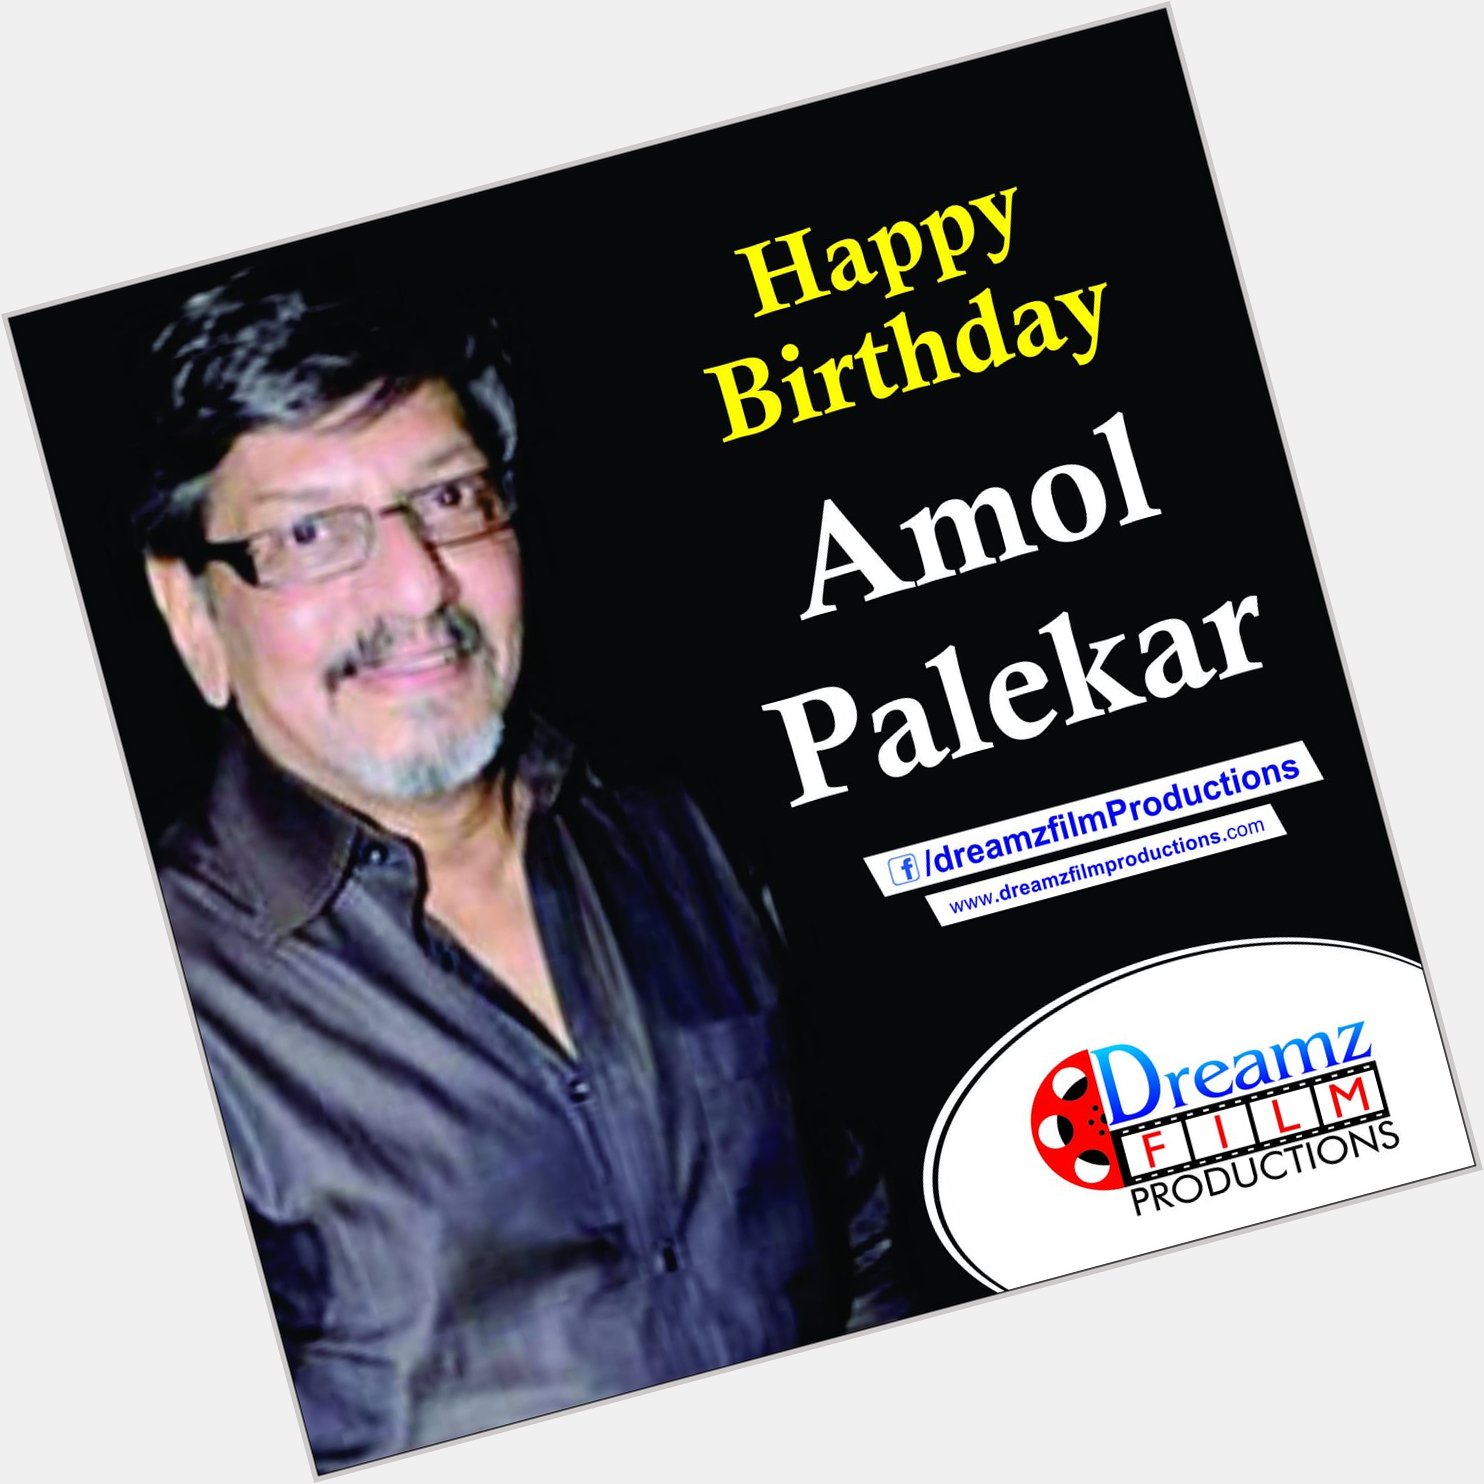  wishes a very Happy Birthday to Amol Palekar (Actor and Director) 